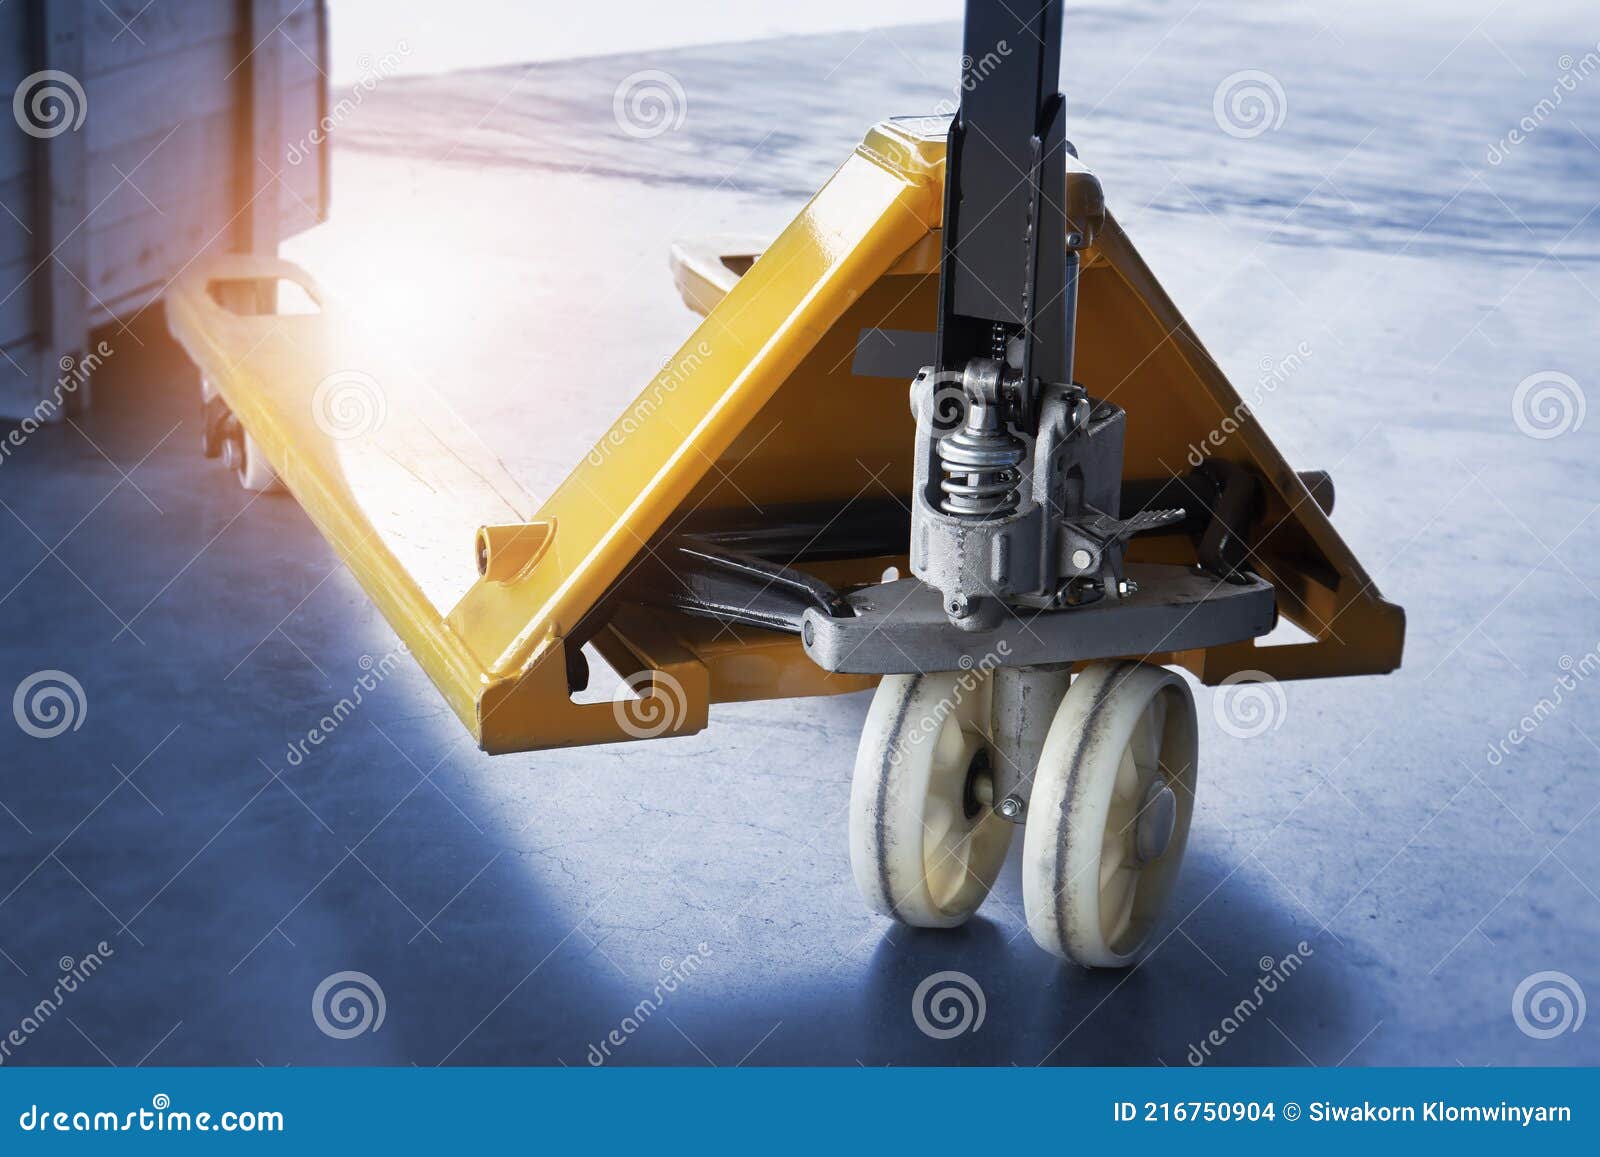 https://thumbs.dreamstime.com/z/yellow-hand-pallet-truck-hand-lift-work-tools-warehouse-yellow-hand-pallet-truck-hand-lift-work-tools-warehouse-216750904.jpg